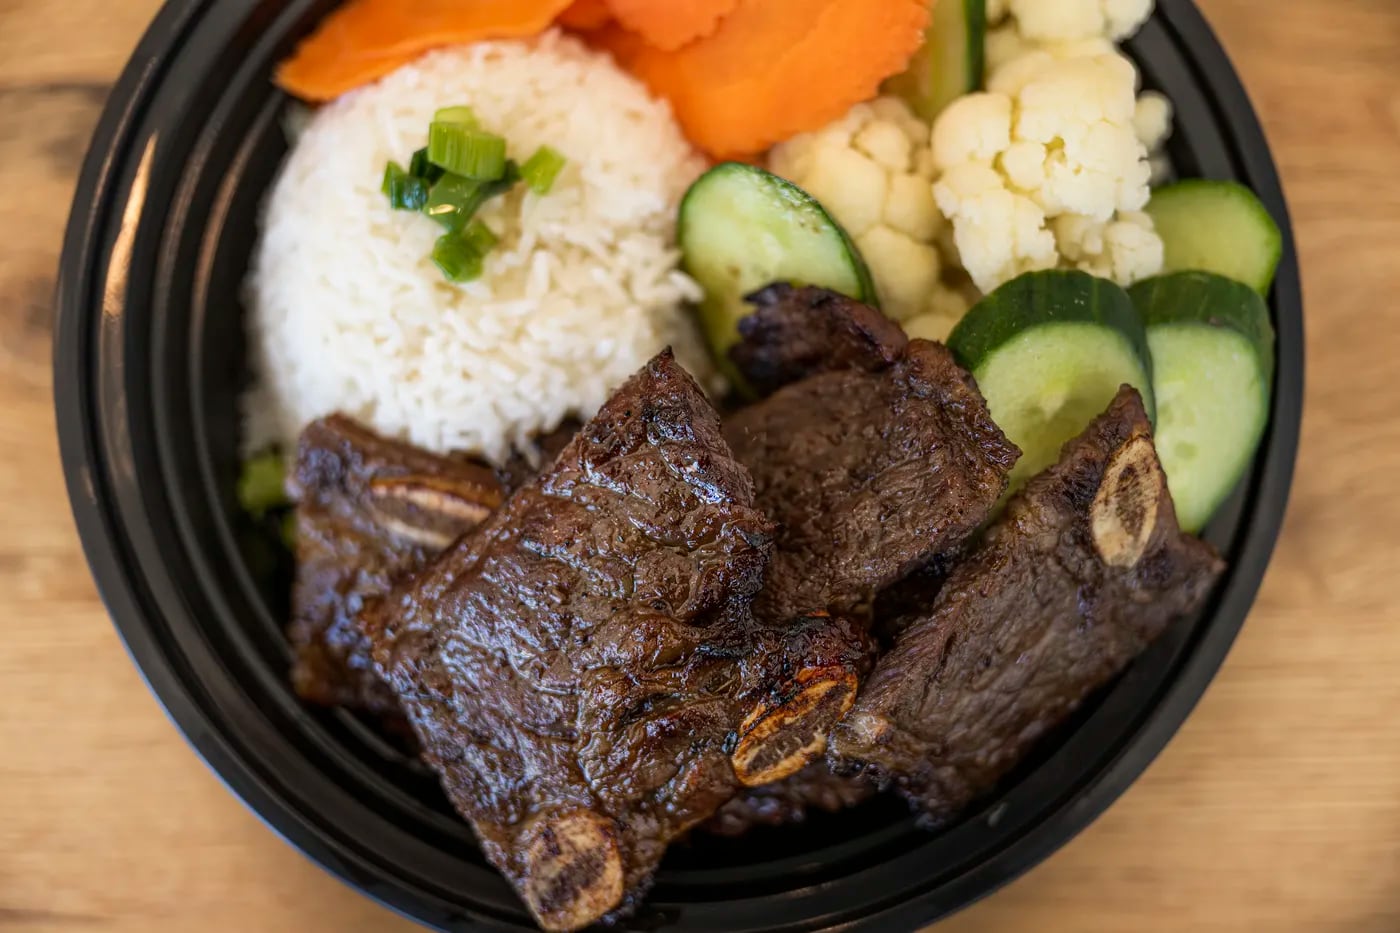 The grilled meats at Two Sisters Vietnamese Eatery are outstanding.